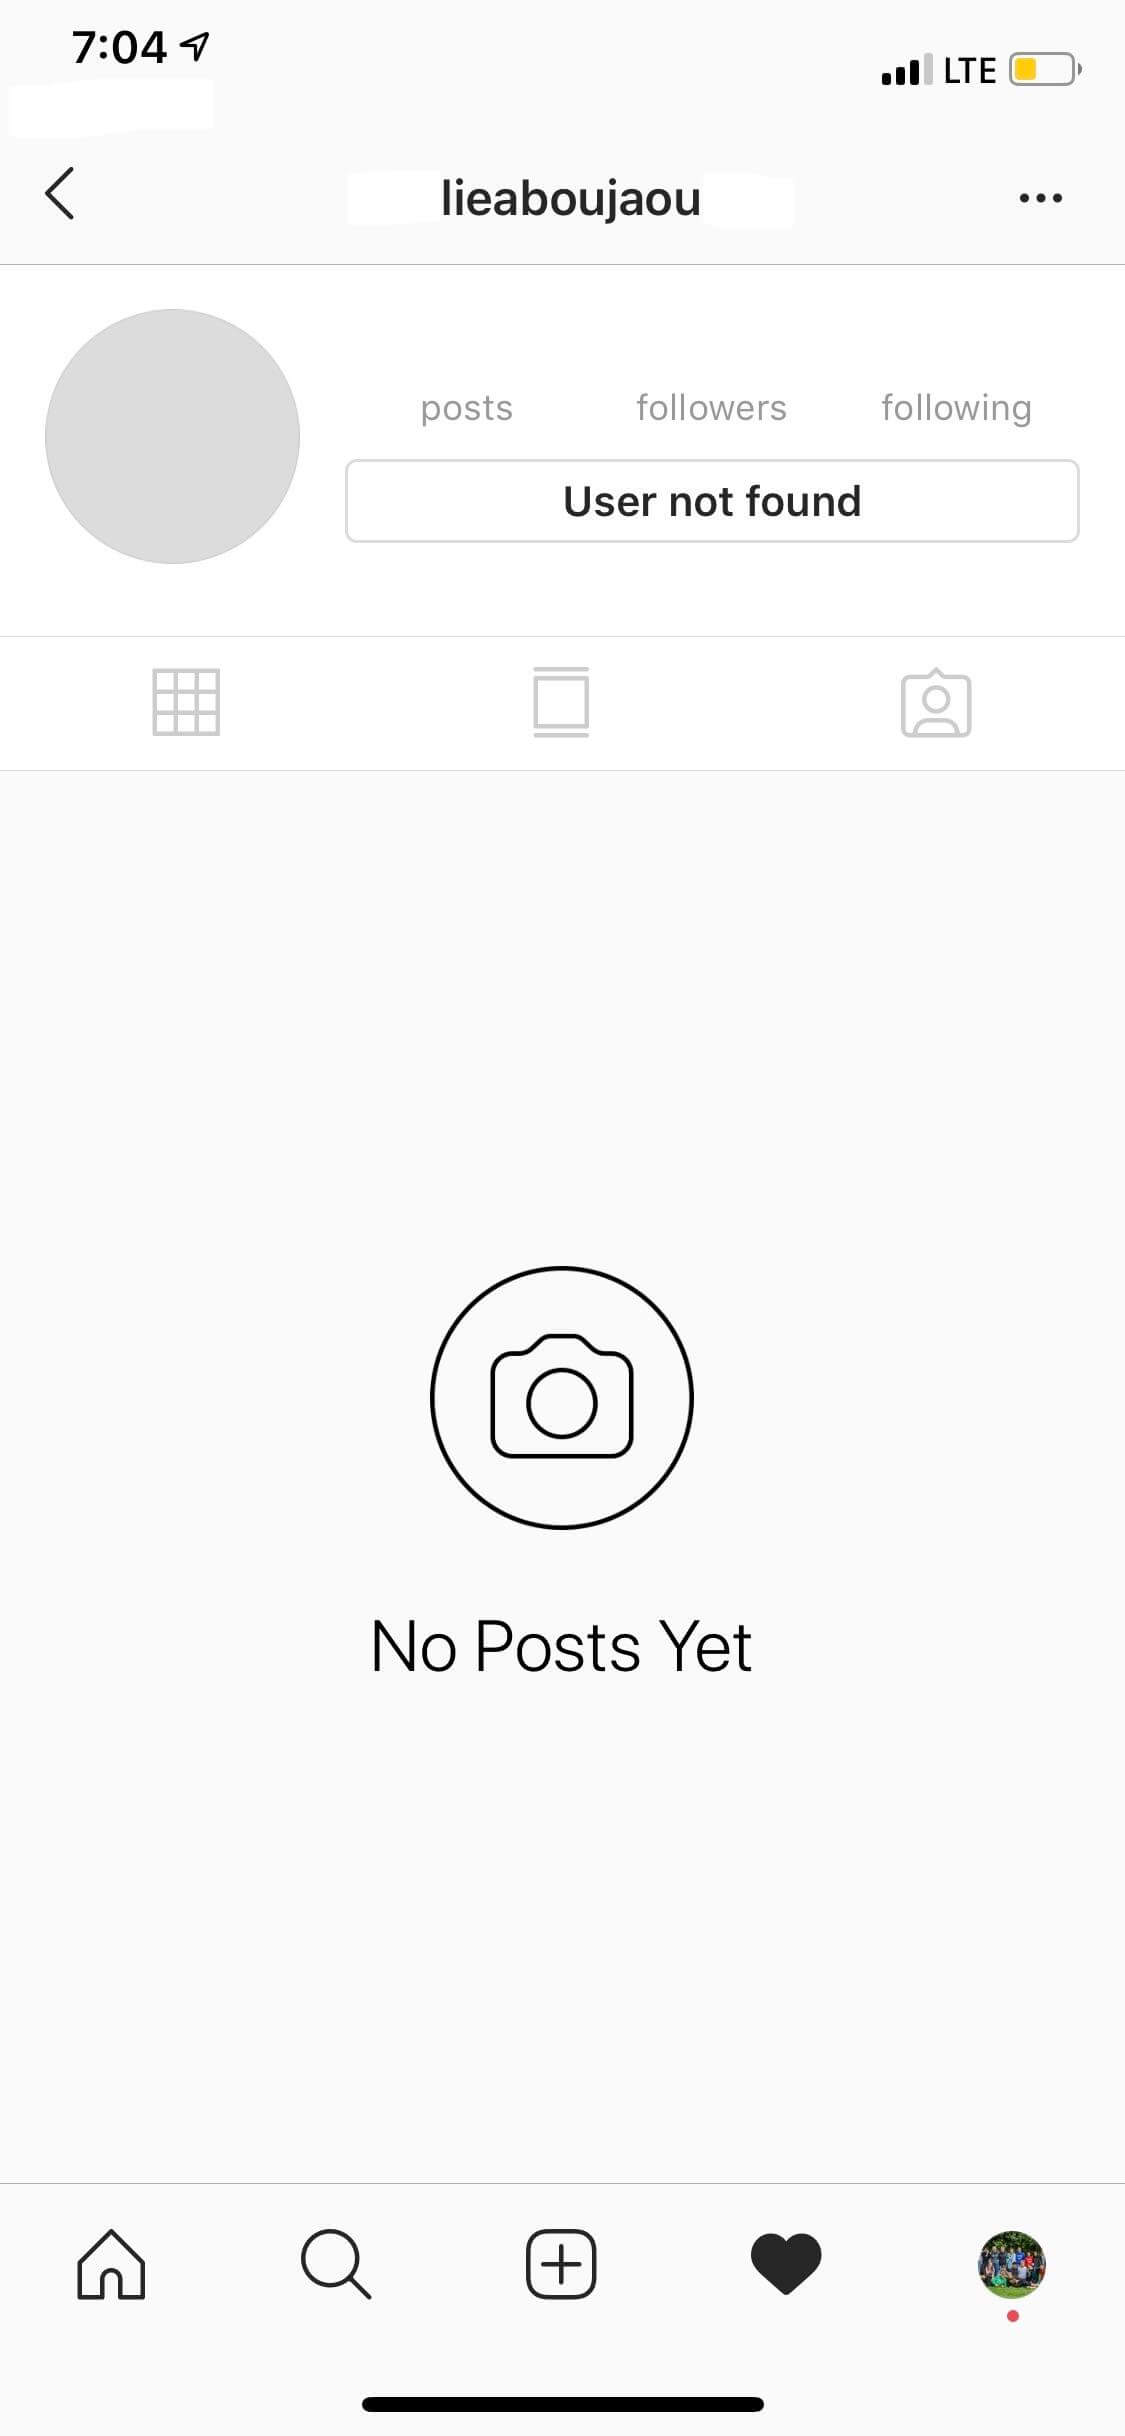 What Does “User not found” Mean on Instagram?